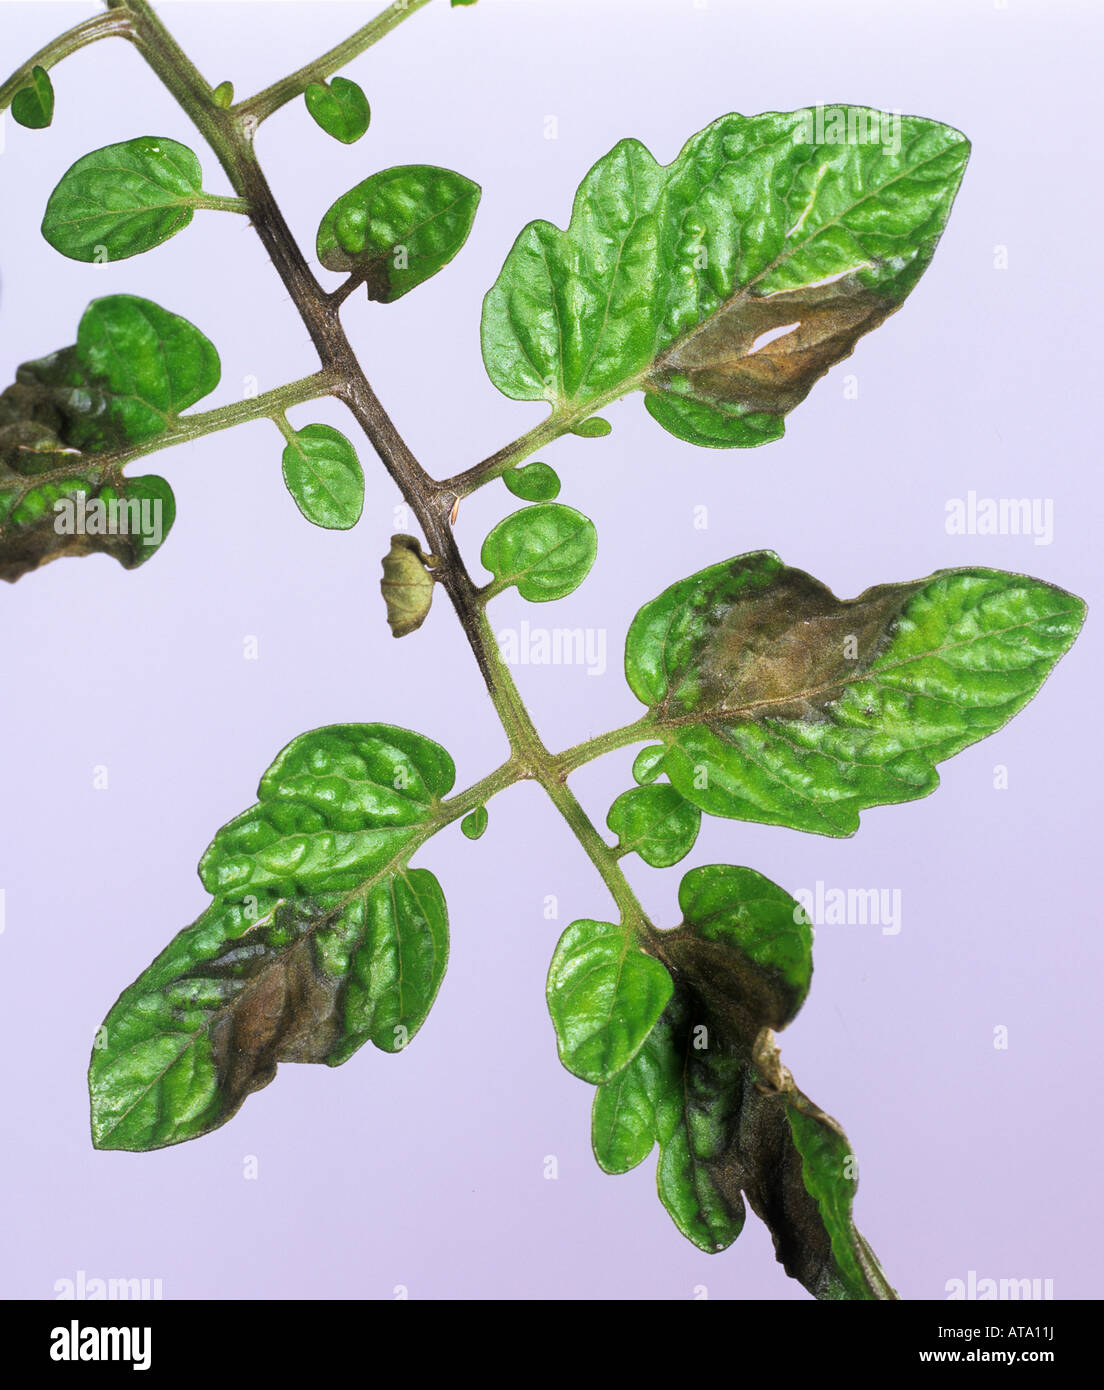 Tomato late blight Phytophthora infestans lesions on greenhouse grown tomato leaves Stock Photo